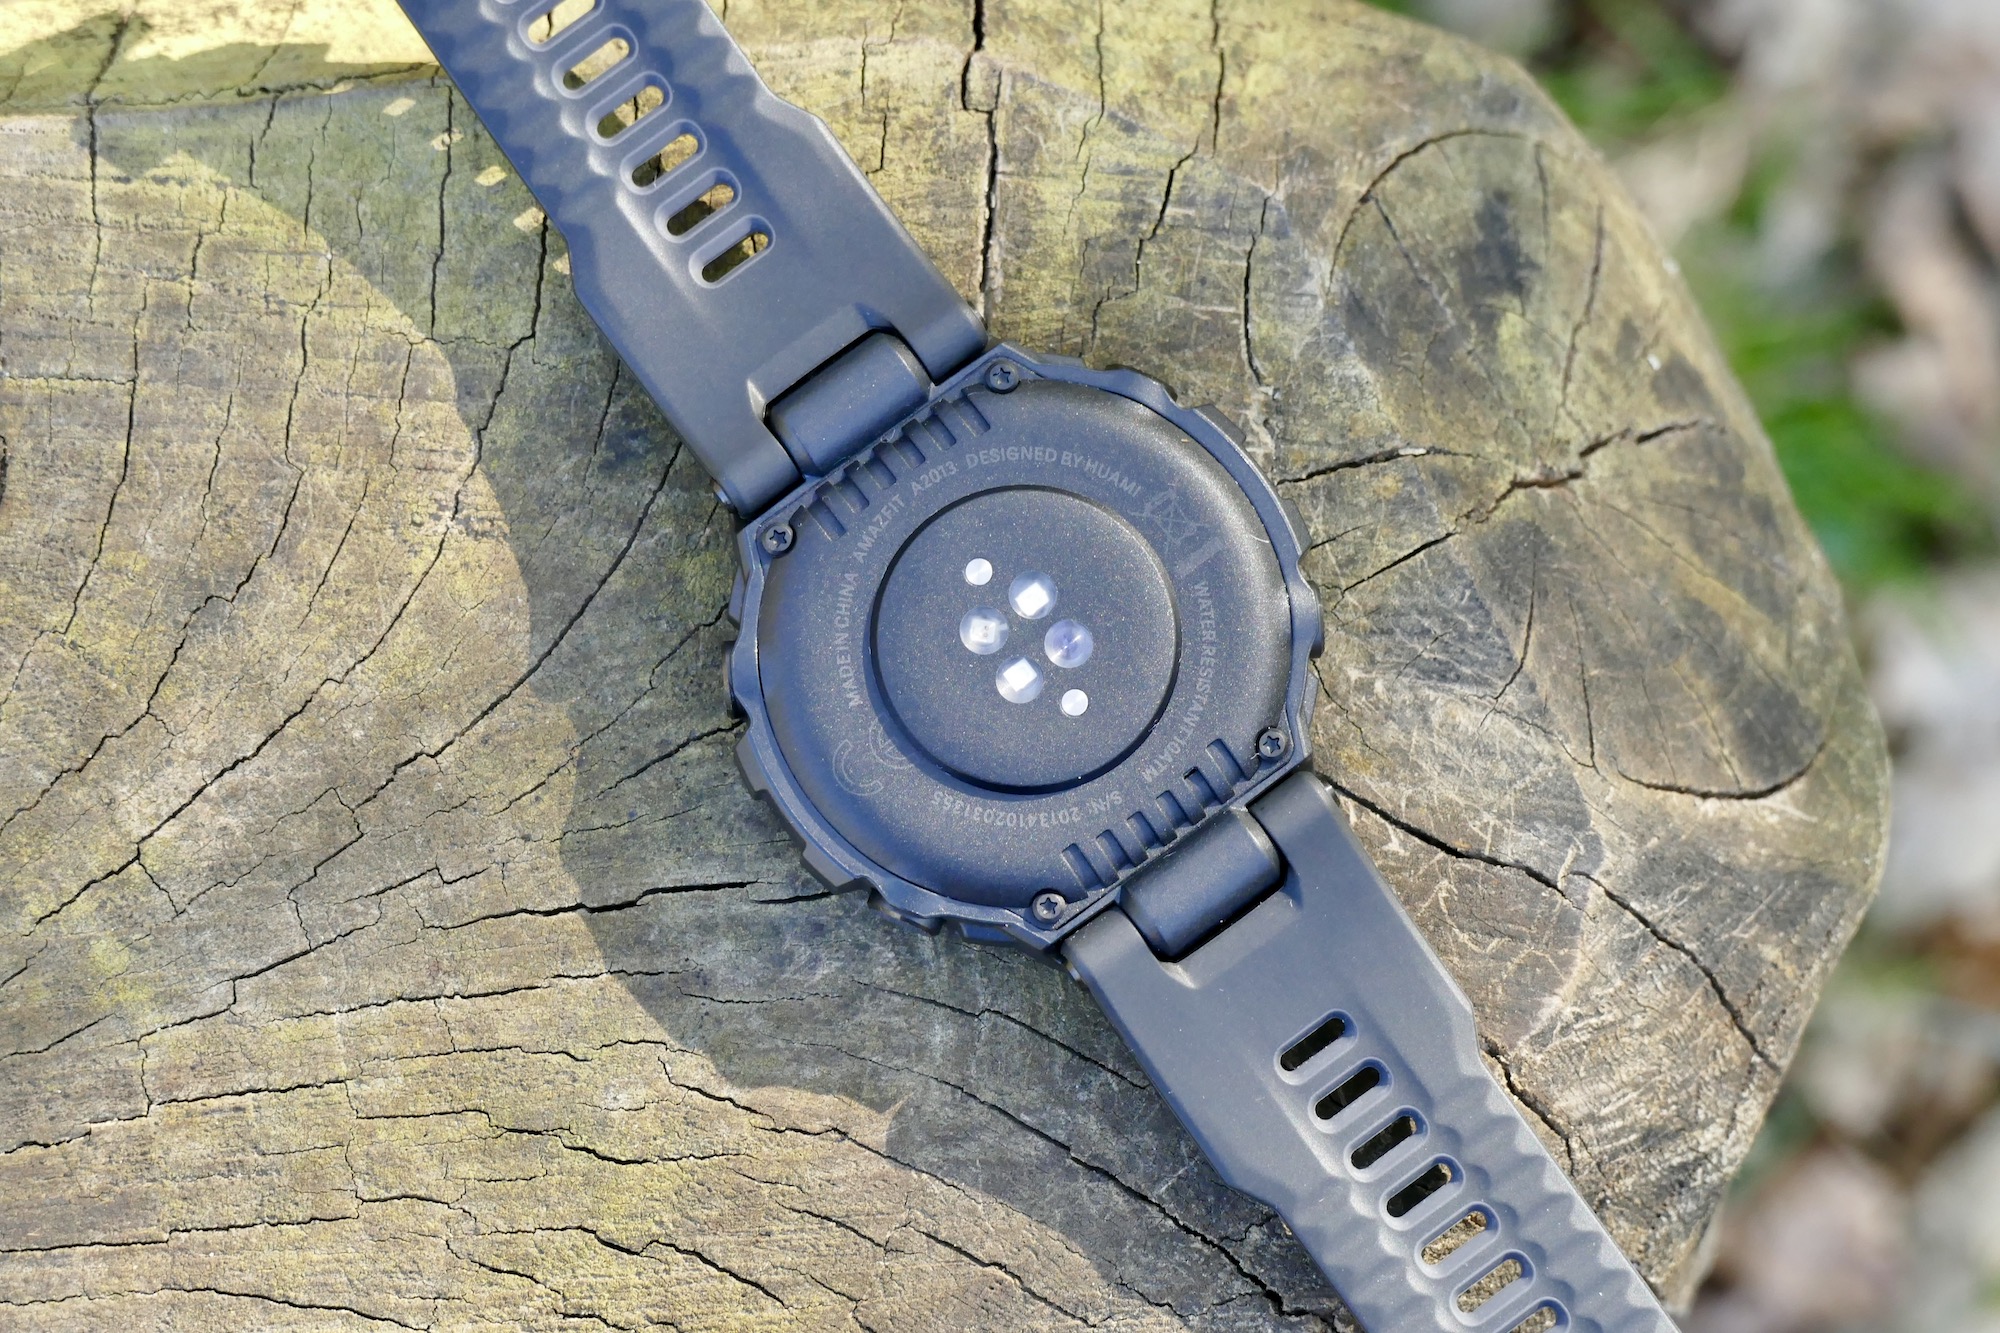 Amazfit T-Rex Pro review  149 facts and highlights